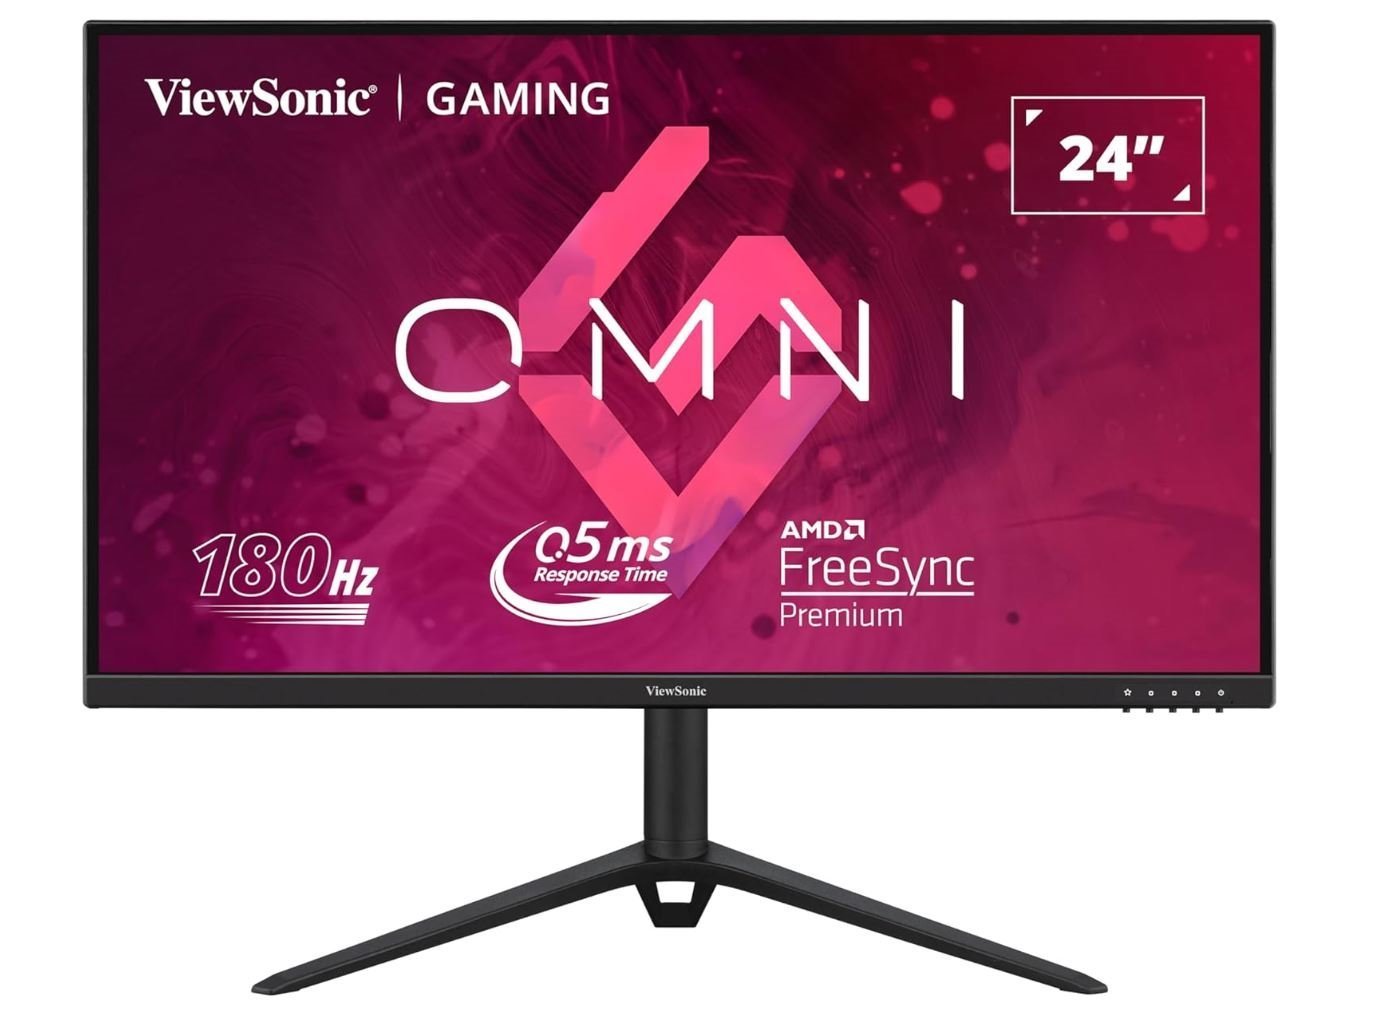 ViewSonic VX2428 24' 180Hz 0.5MS, Fast Ips, Crisp Image And Smooth Play. Vesa Clear MR Certified, Freesync, Adaptive SYNC, Speakers, Monitor